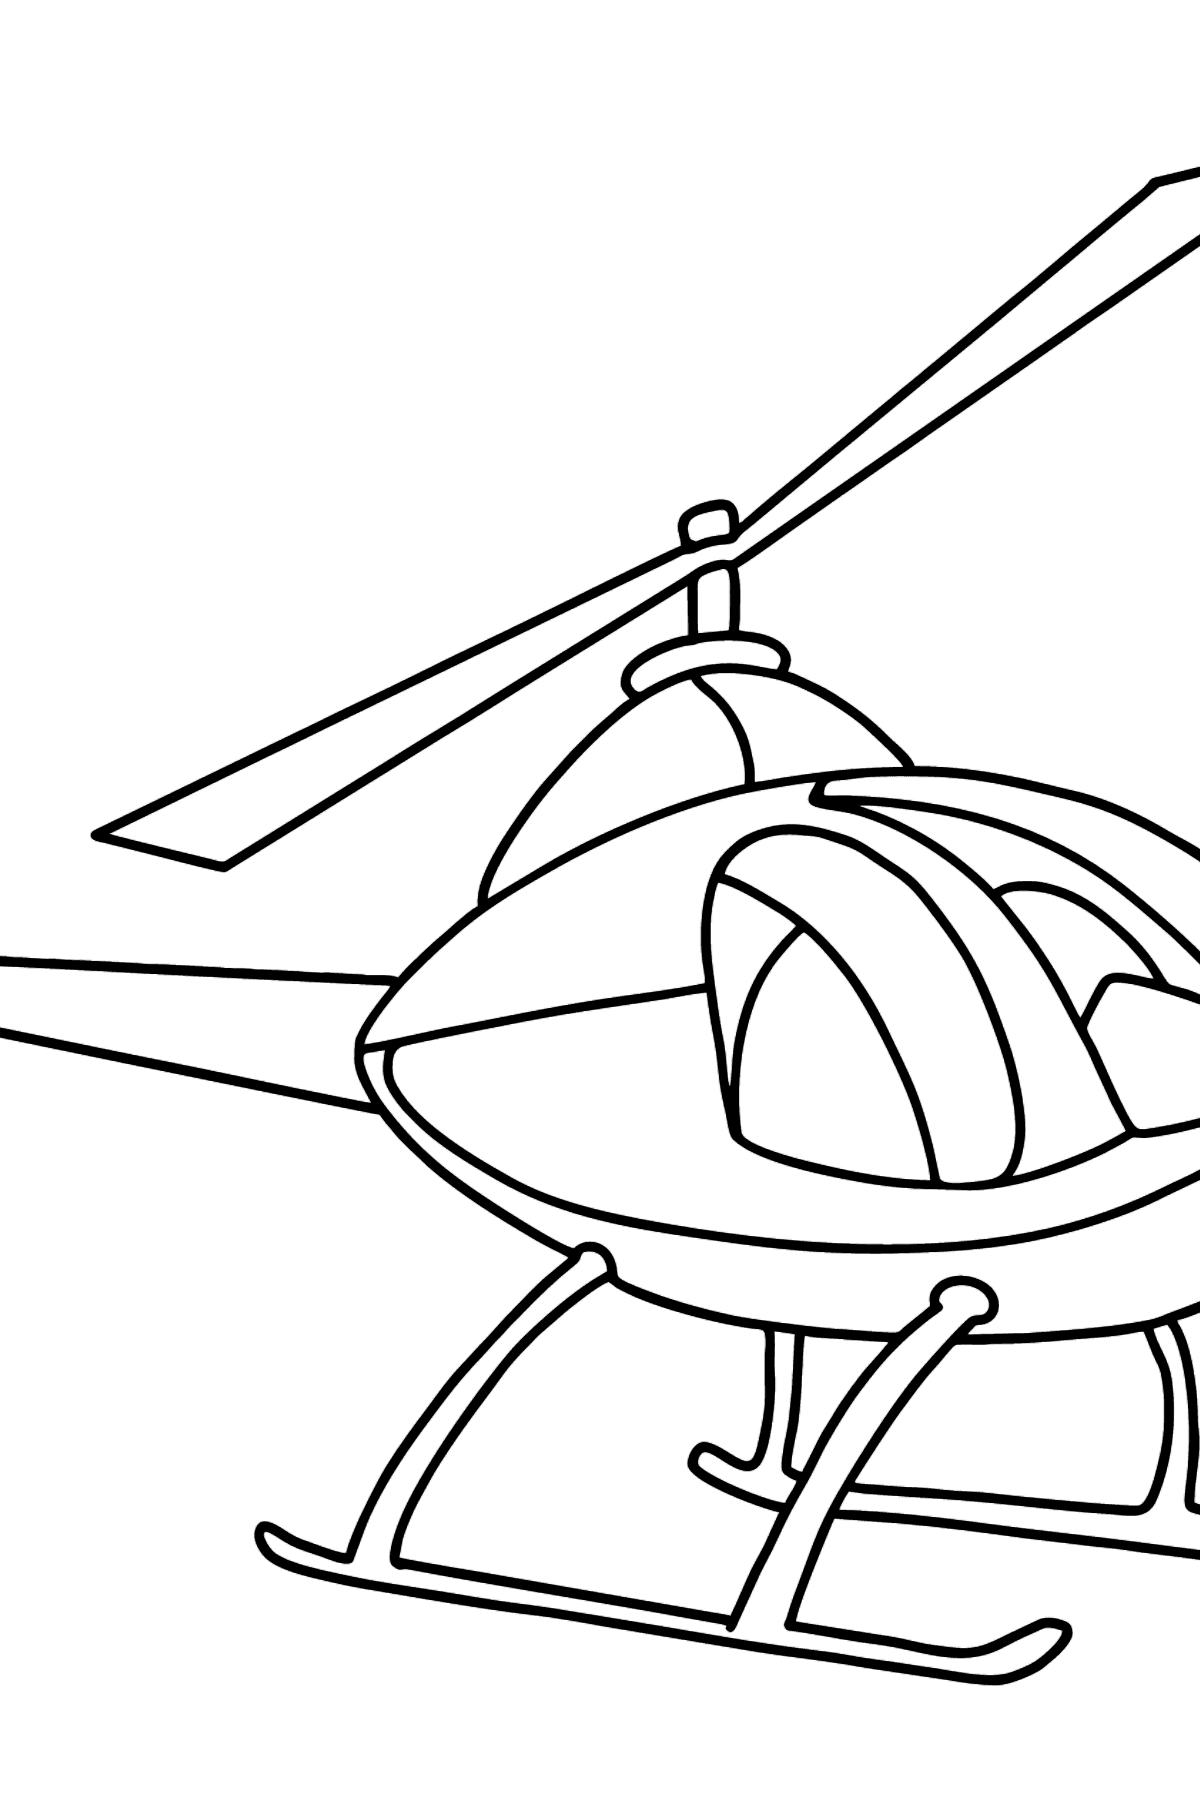 Helicopter coloring page for kids - Coloring Pages for Kids